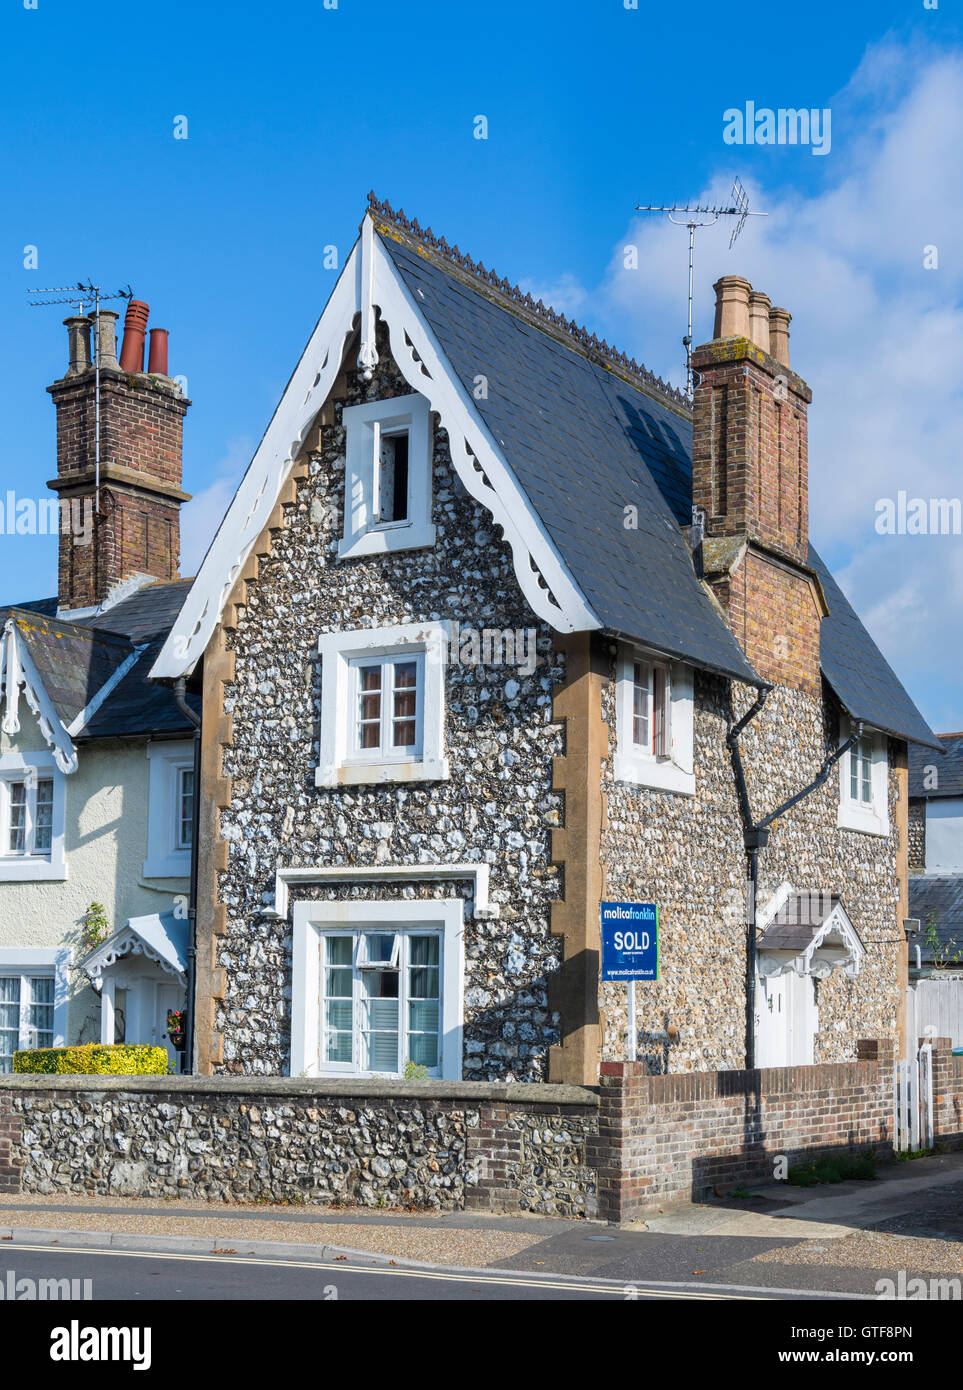 Old flint detached house in Southern UK. Stock Photo